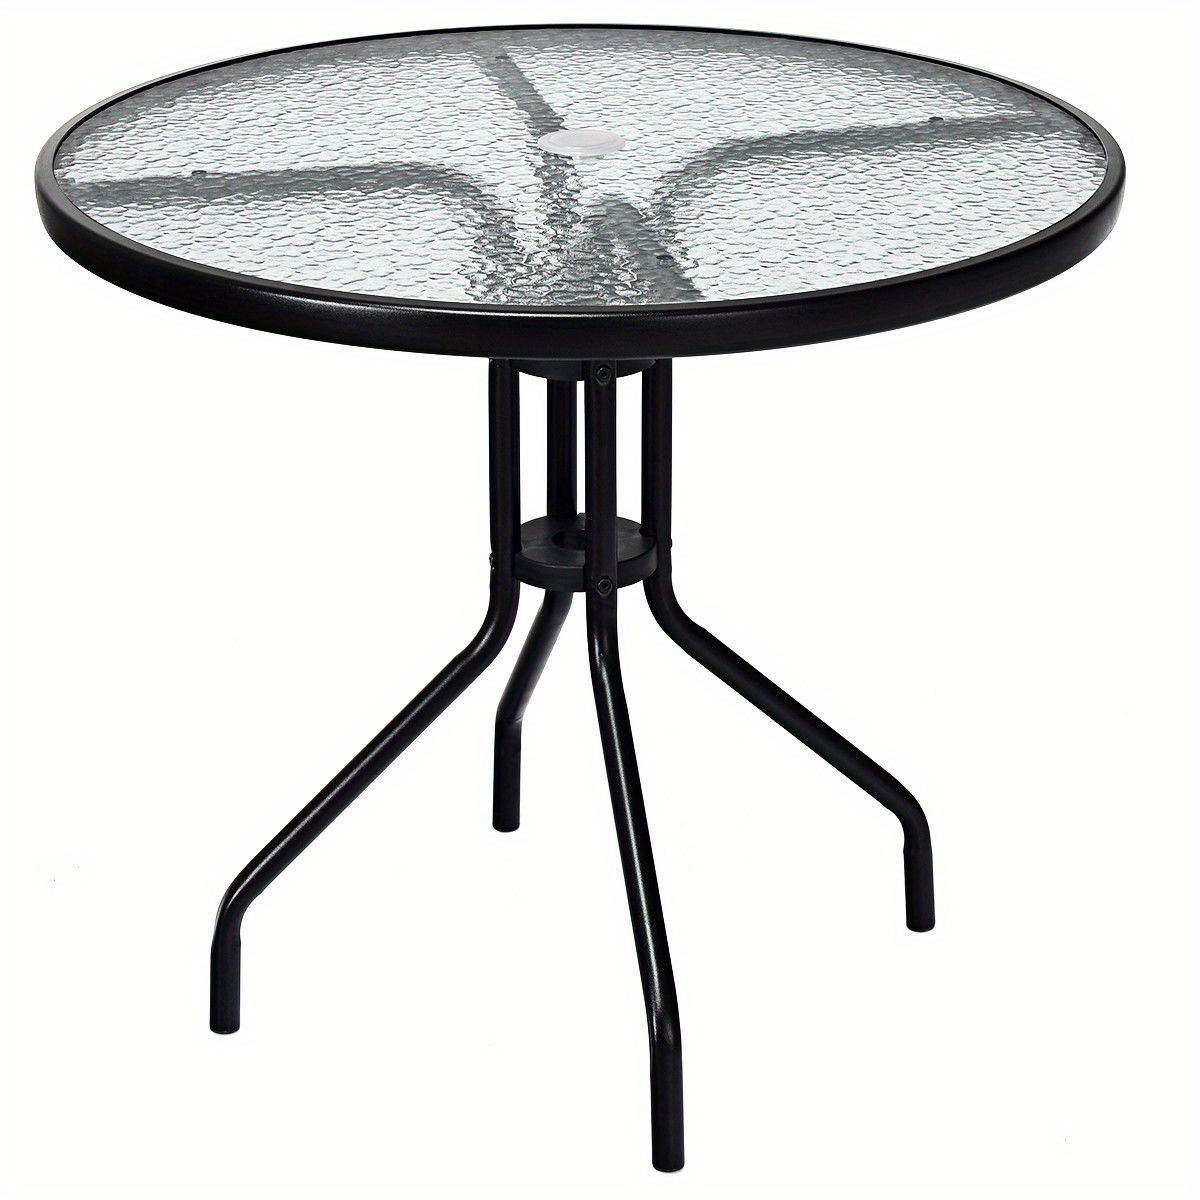 

Lifezeal 32" Outdoor Round Table Tempered Glass Top W/umbrella Hole Steel Frame